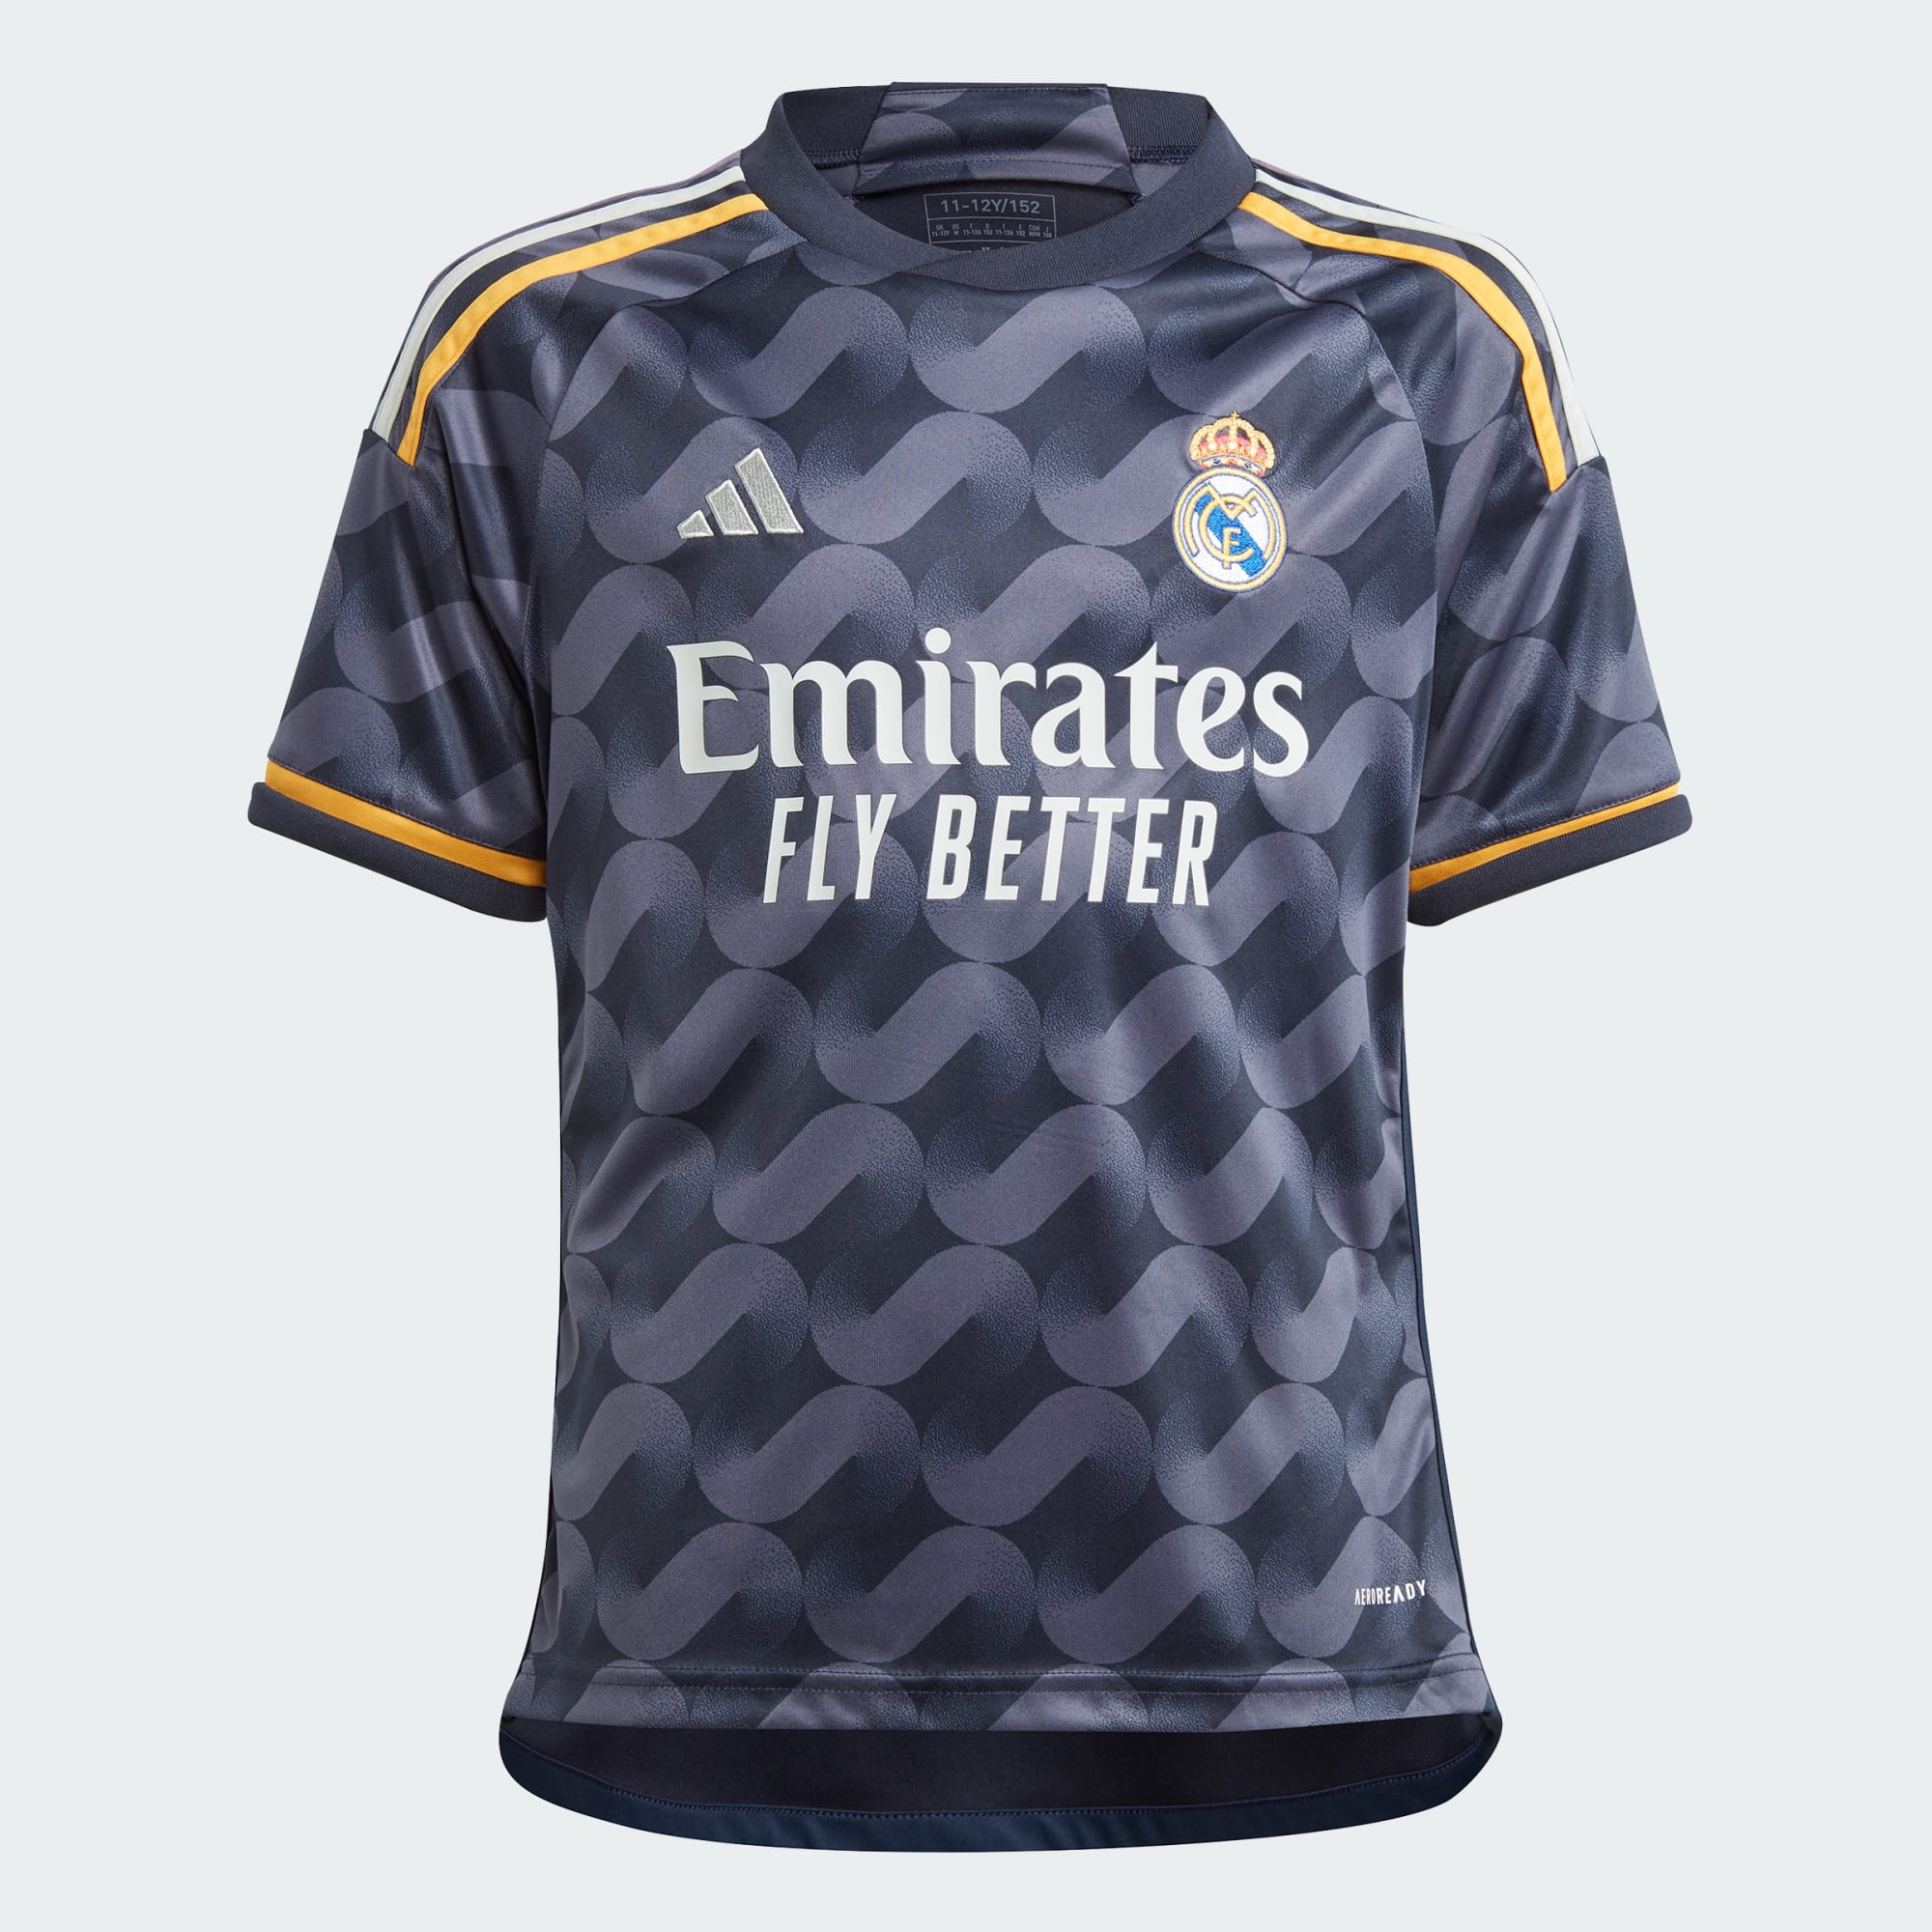 Boys Adidas Real Madrid 23/24 Home Kids Jersey - White